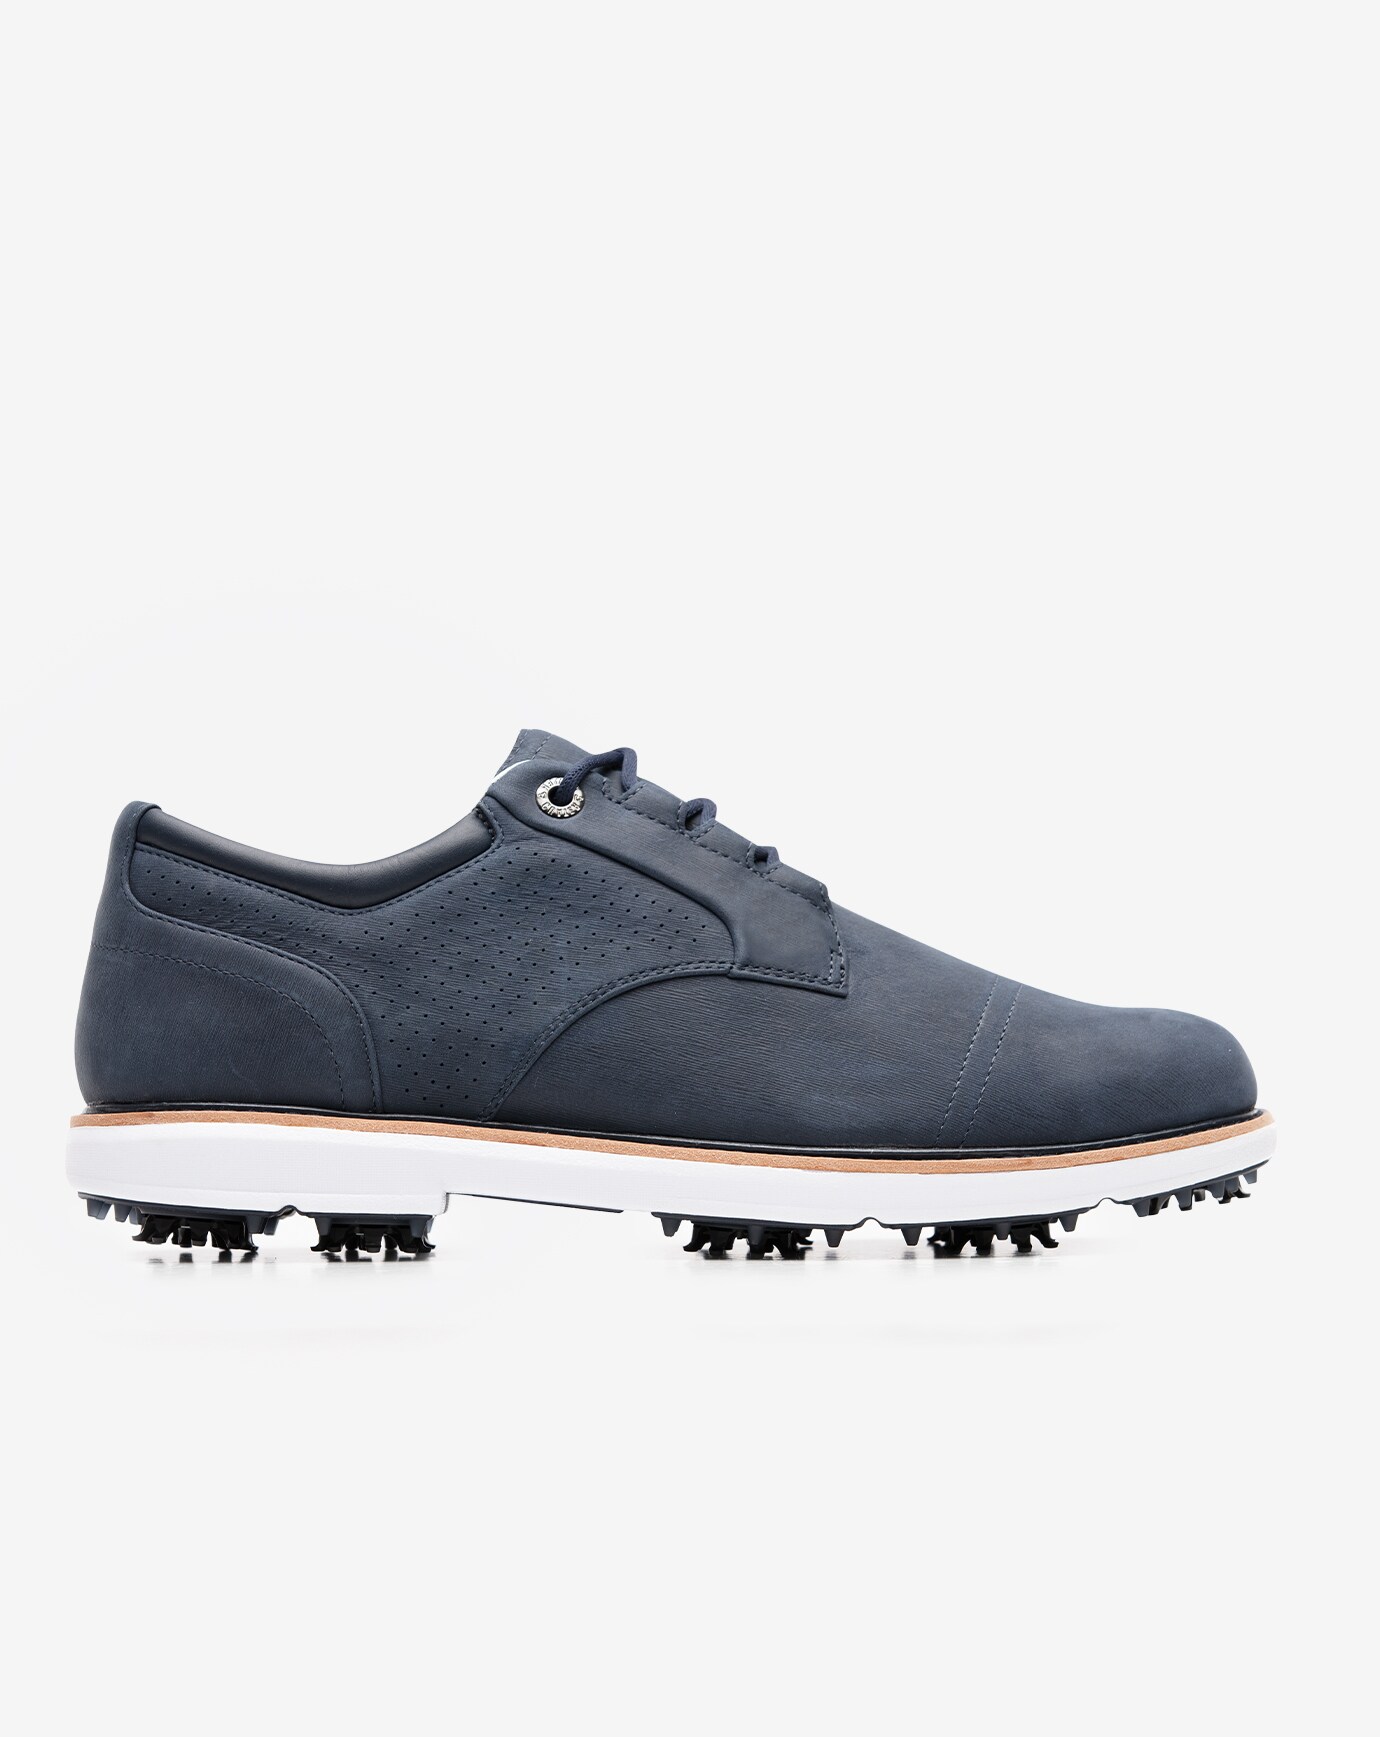 THE LEGEND SPIKED GOLF SHOE Image 3